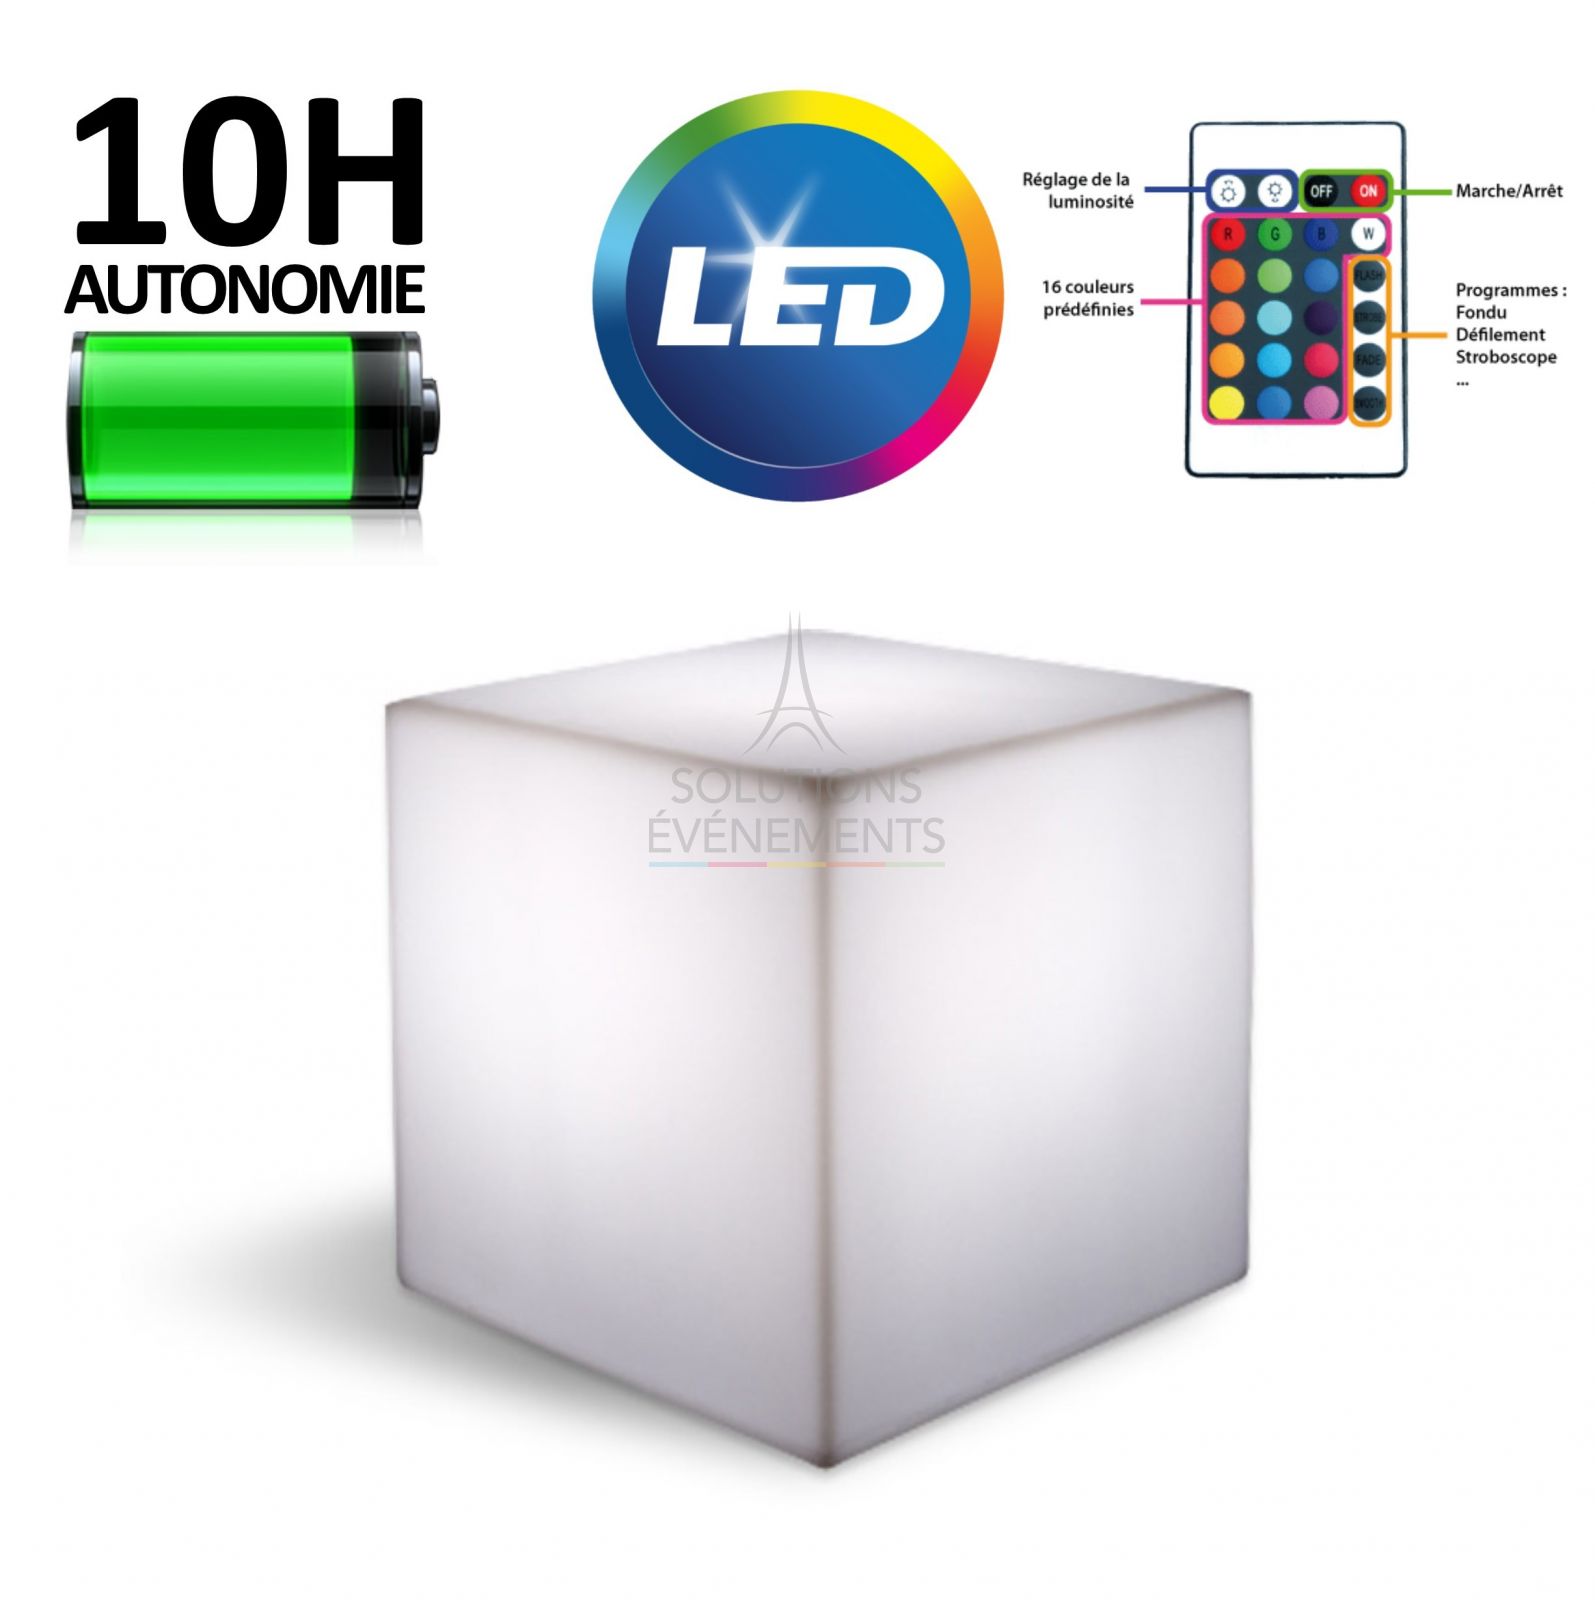 Rental of 40x40x40cm light cubes with battery-powered LED lighting